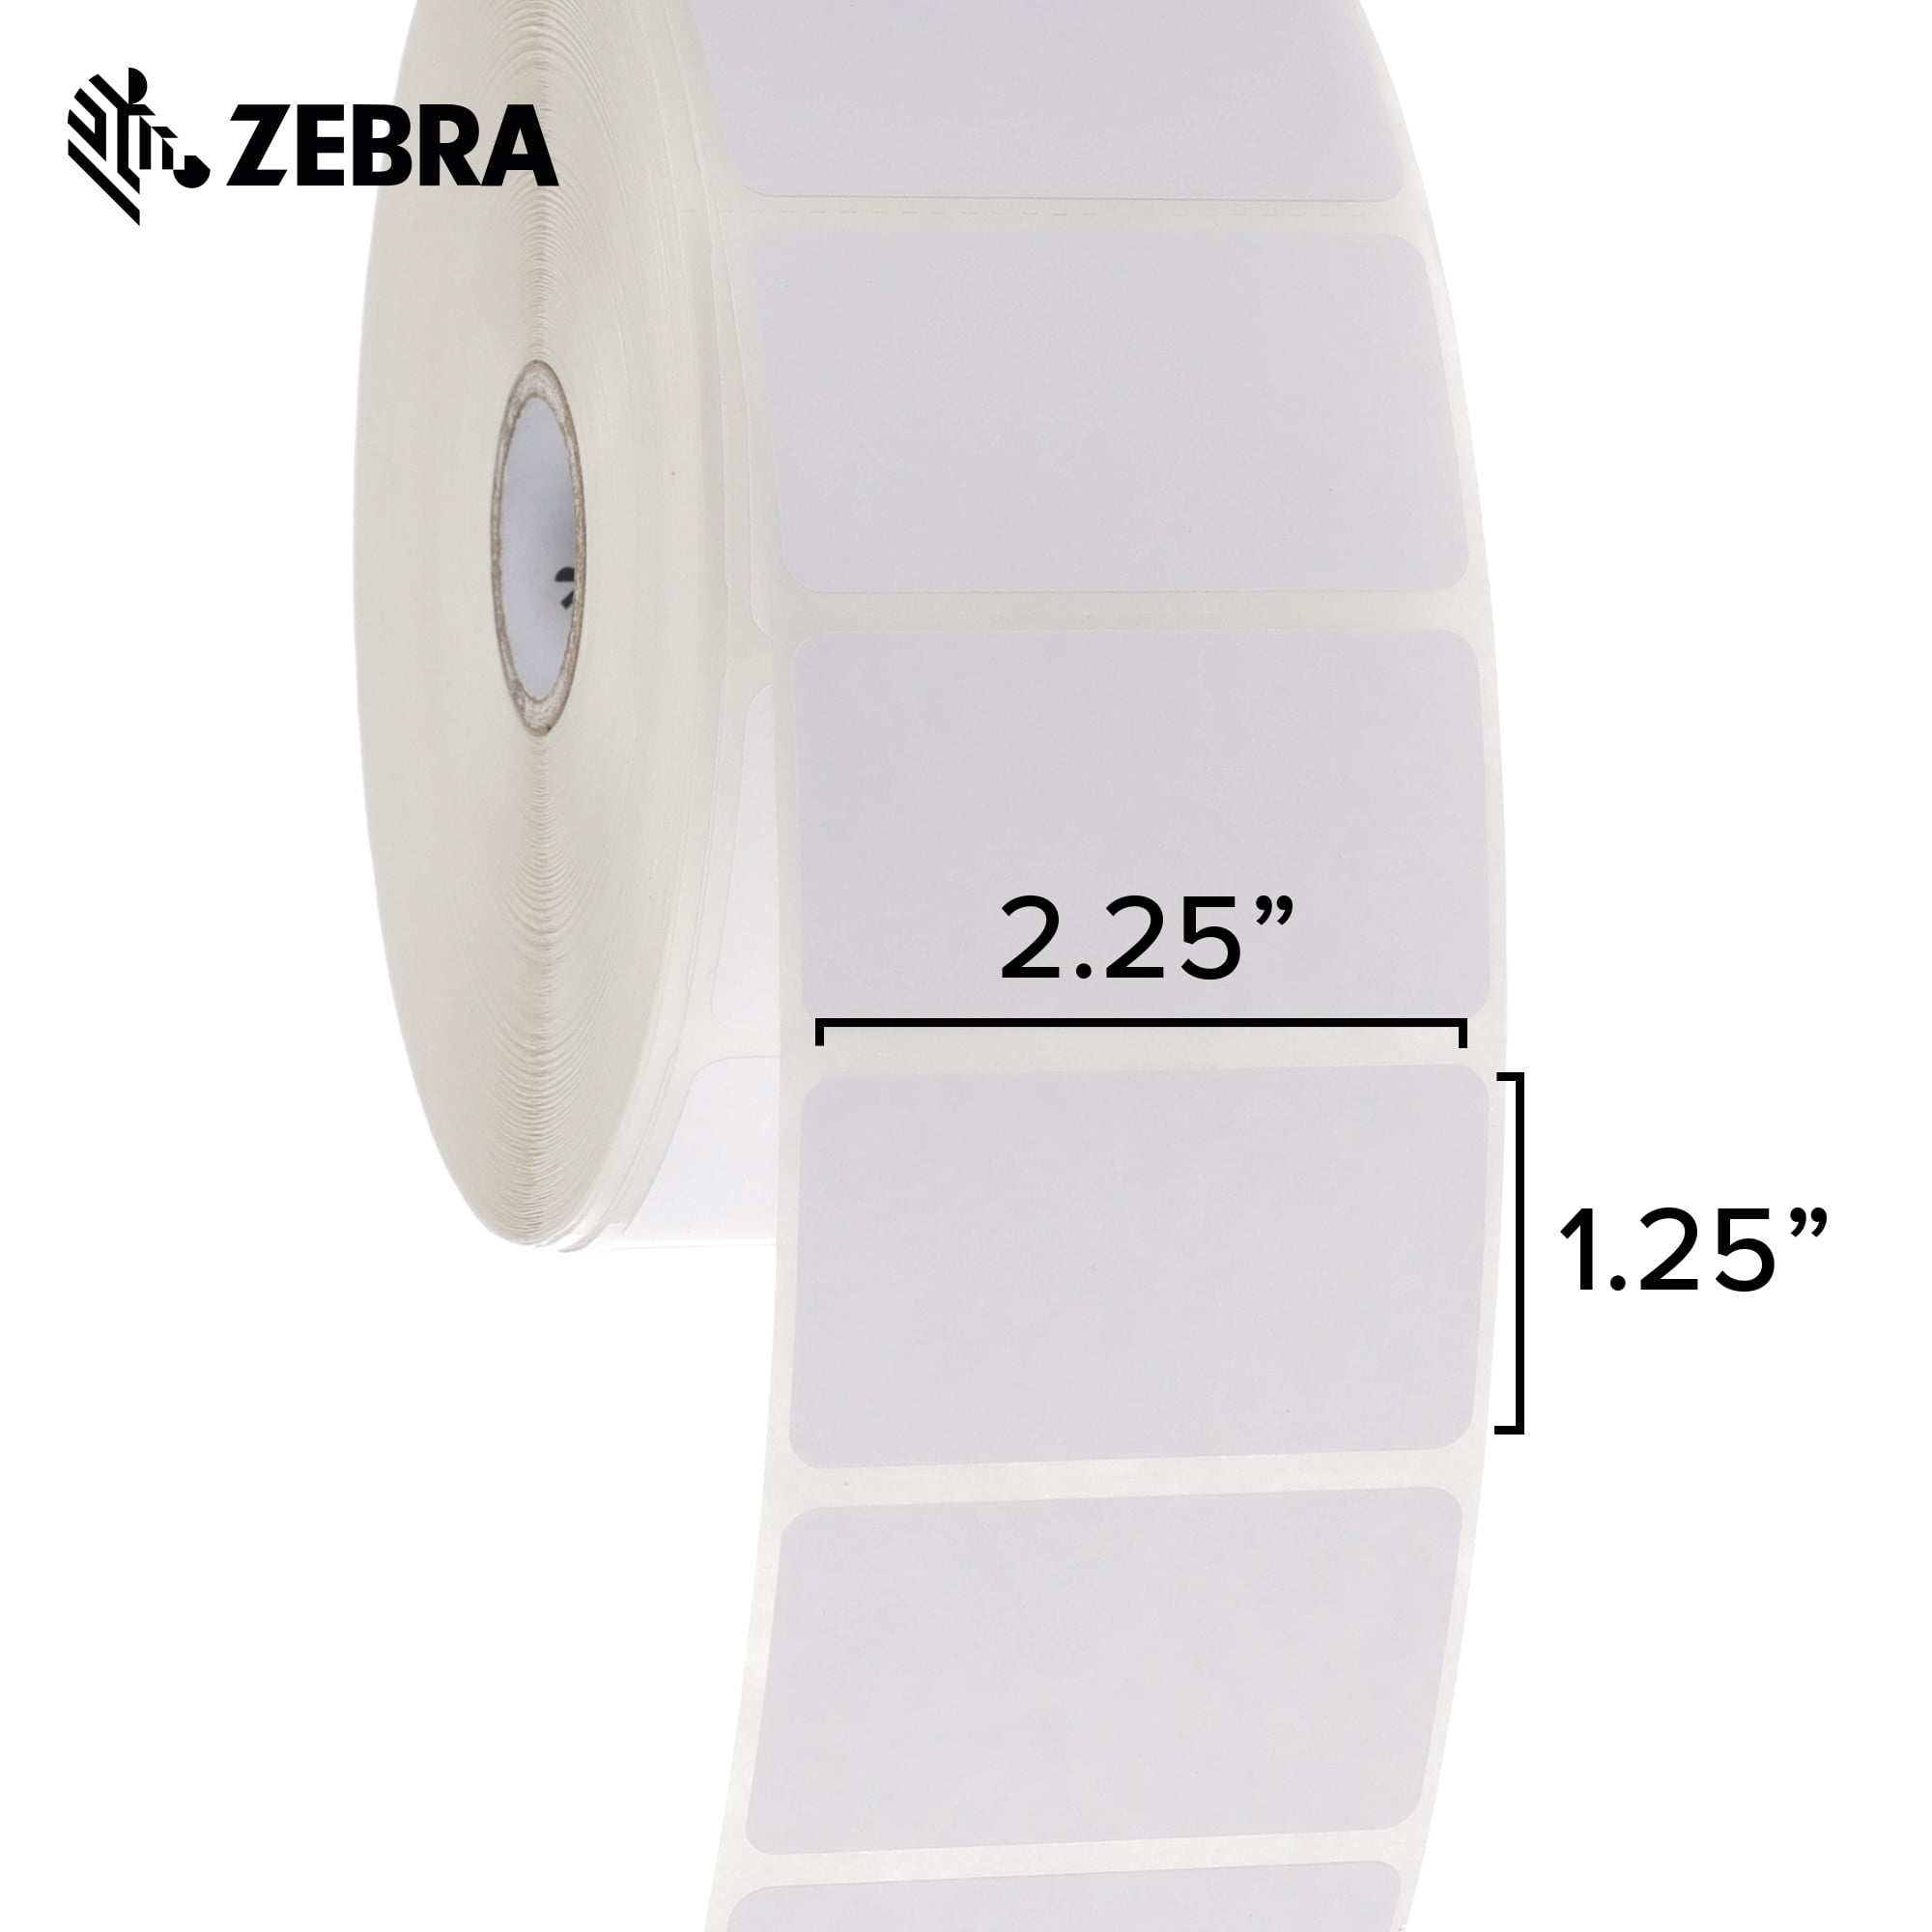 Zebra 2.25 x 1.25 in Direct Thermal Paper labels ZPerform